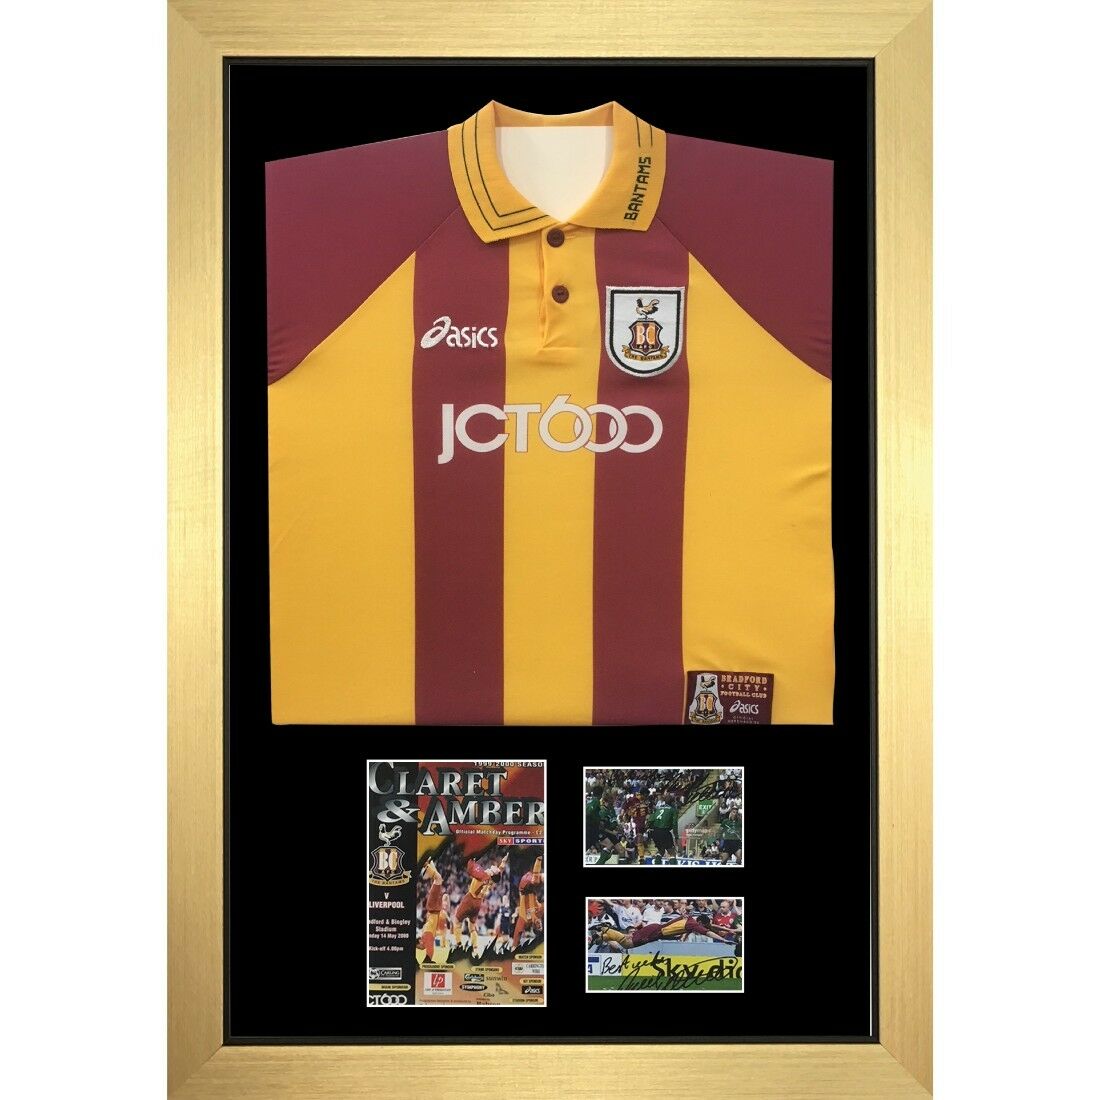 Football Shirt Frame with Program and 1 x 6” x 4” photo and ticket White Mount 